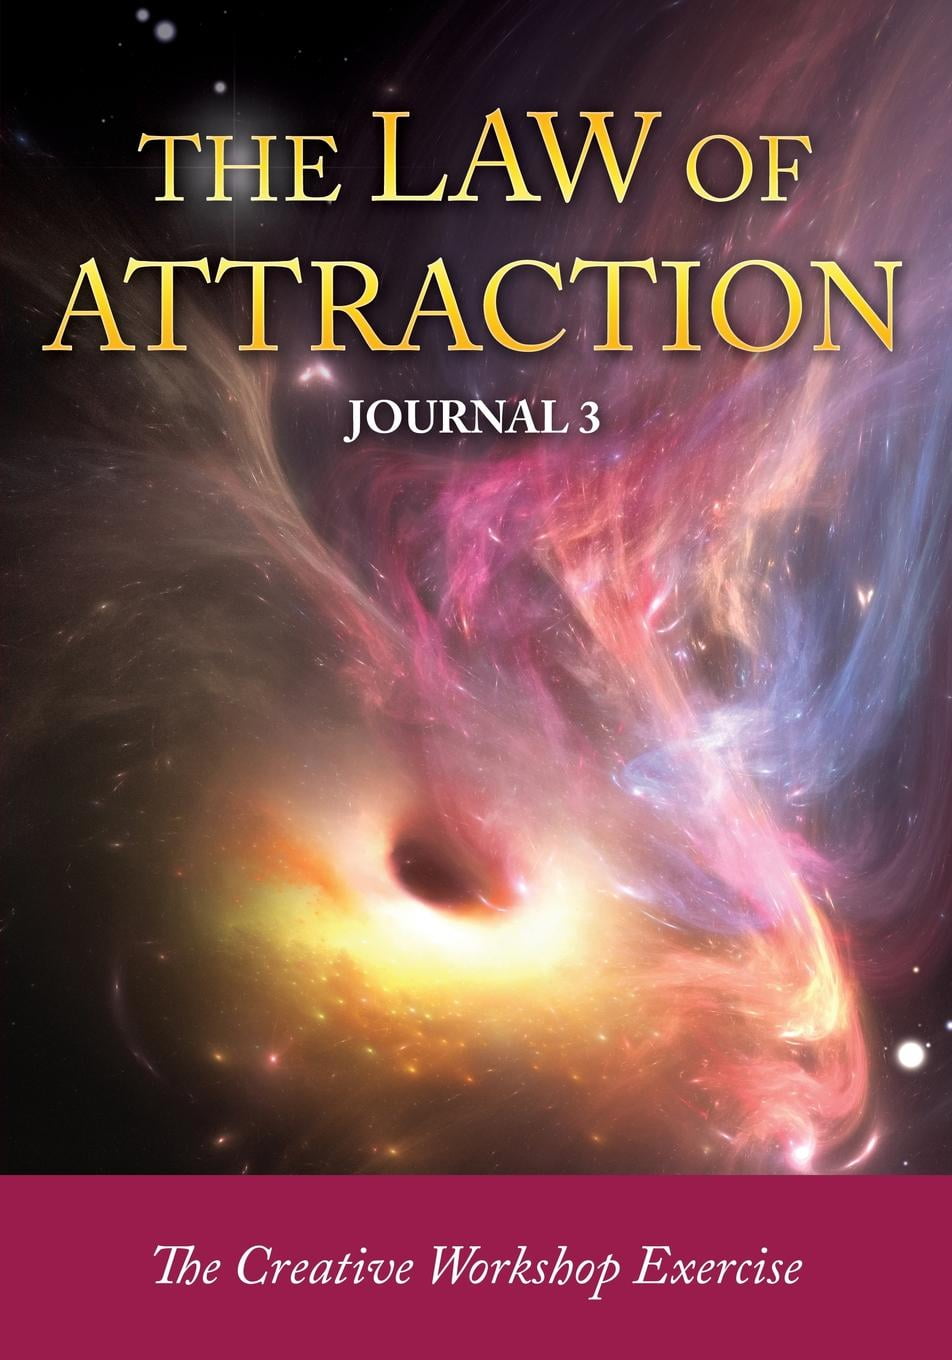 about book law of attraction